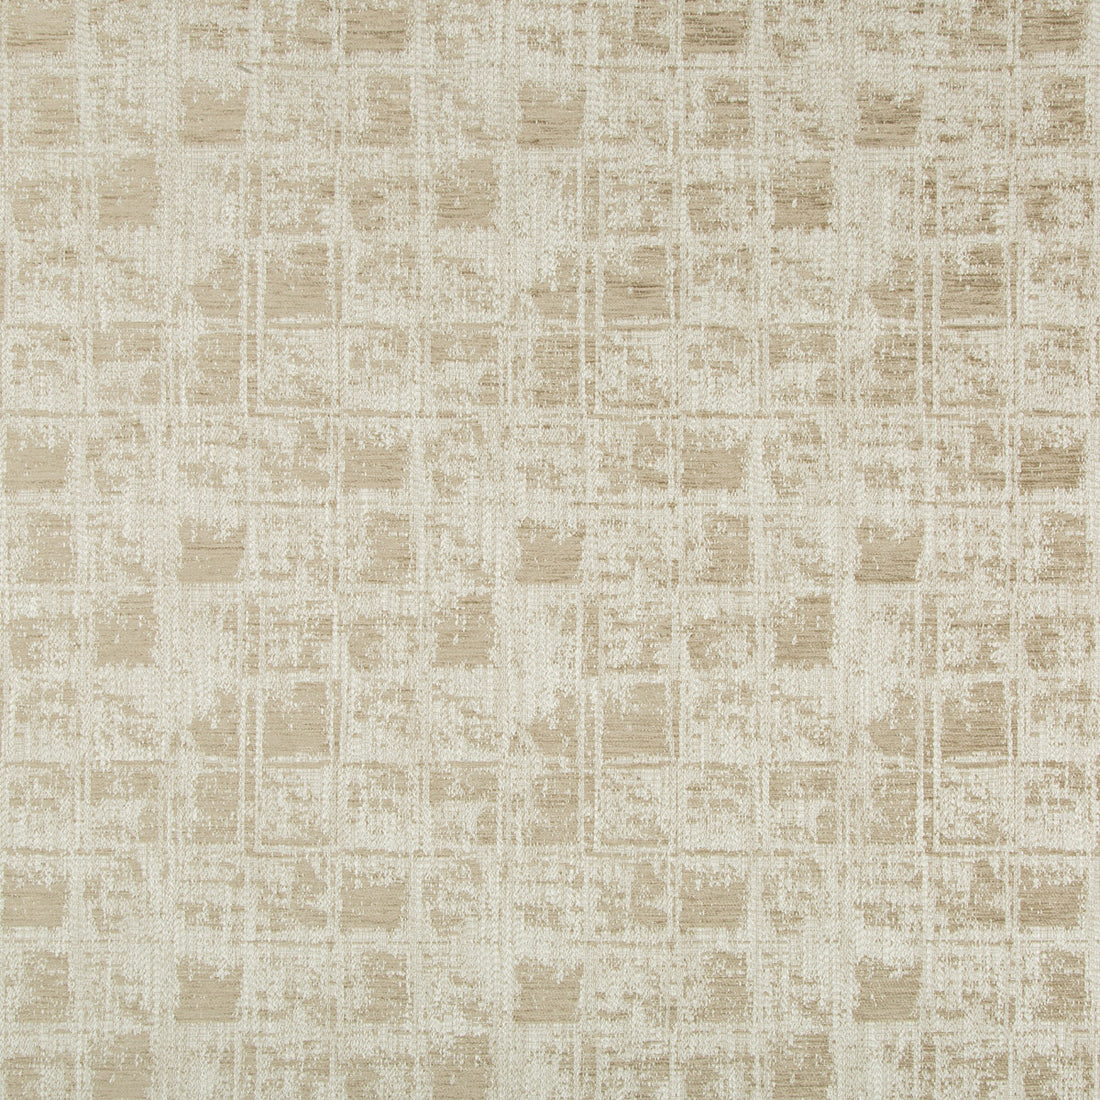 Sumi fabric in taupe color - pattern 35423.16.0 - by Kravet Couture in the Izu Collection collection